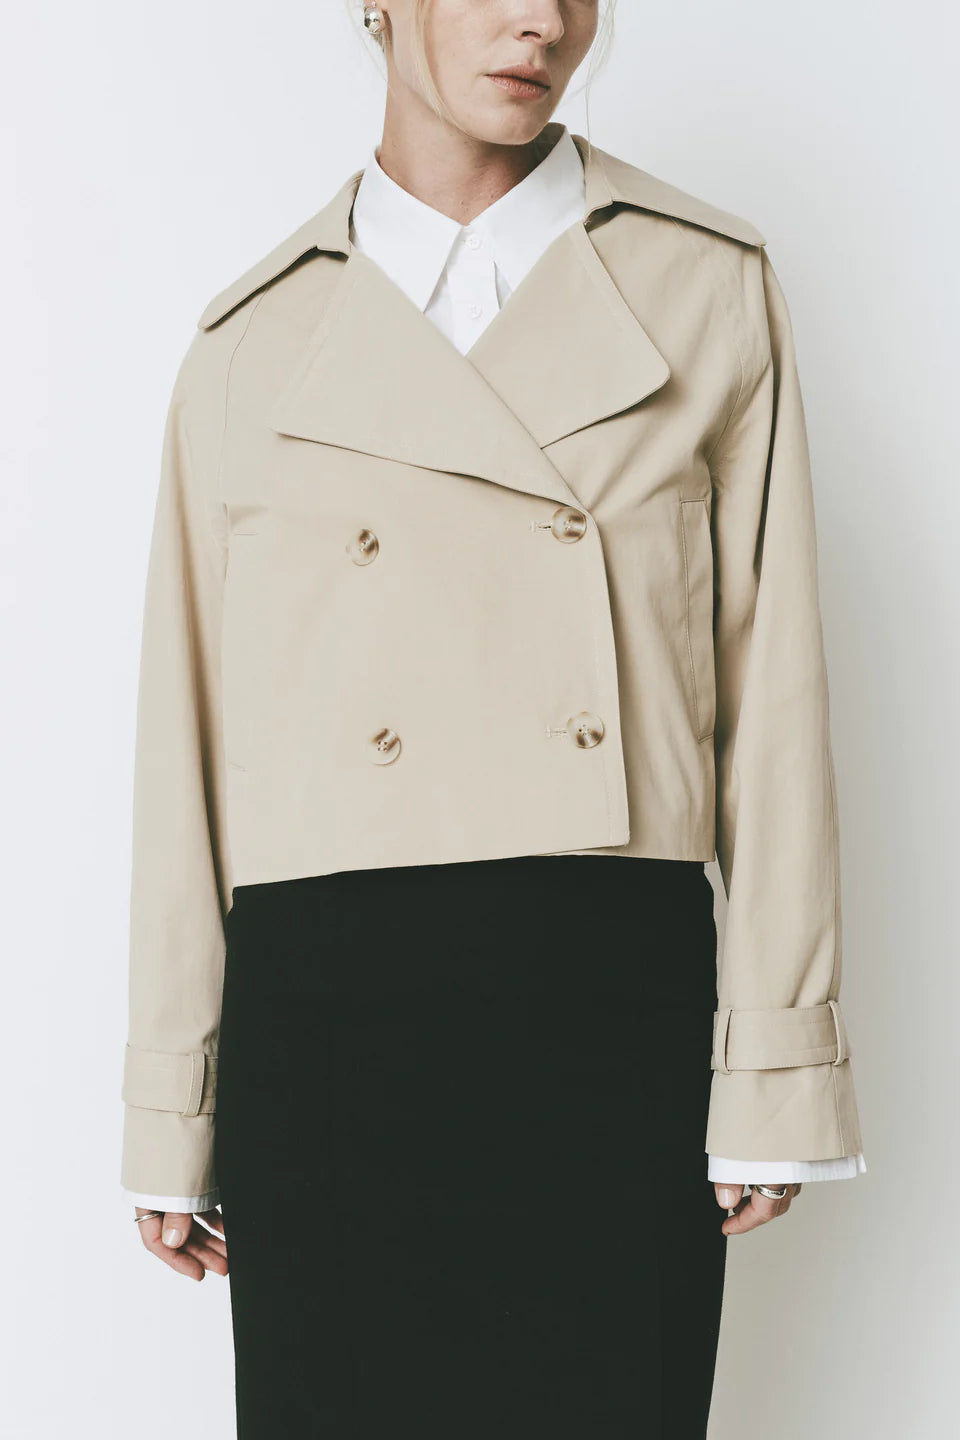 Sophie Rue Honore Cropped Trench Coat, cropped coat, trench coat, cropped trench coat, women's clothing